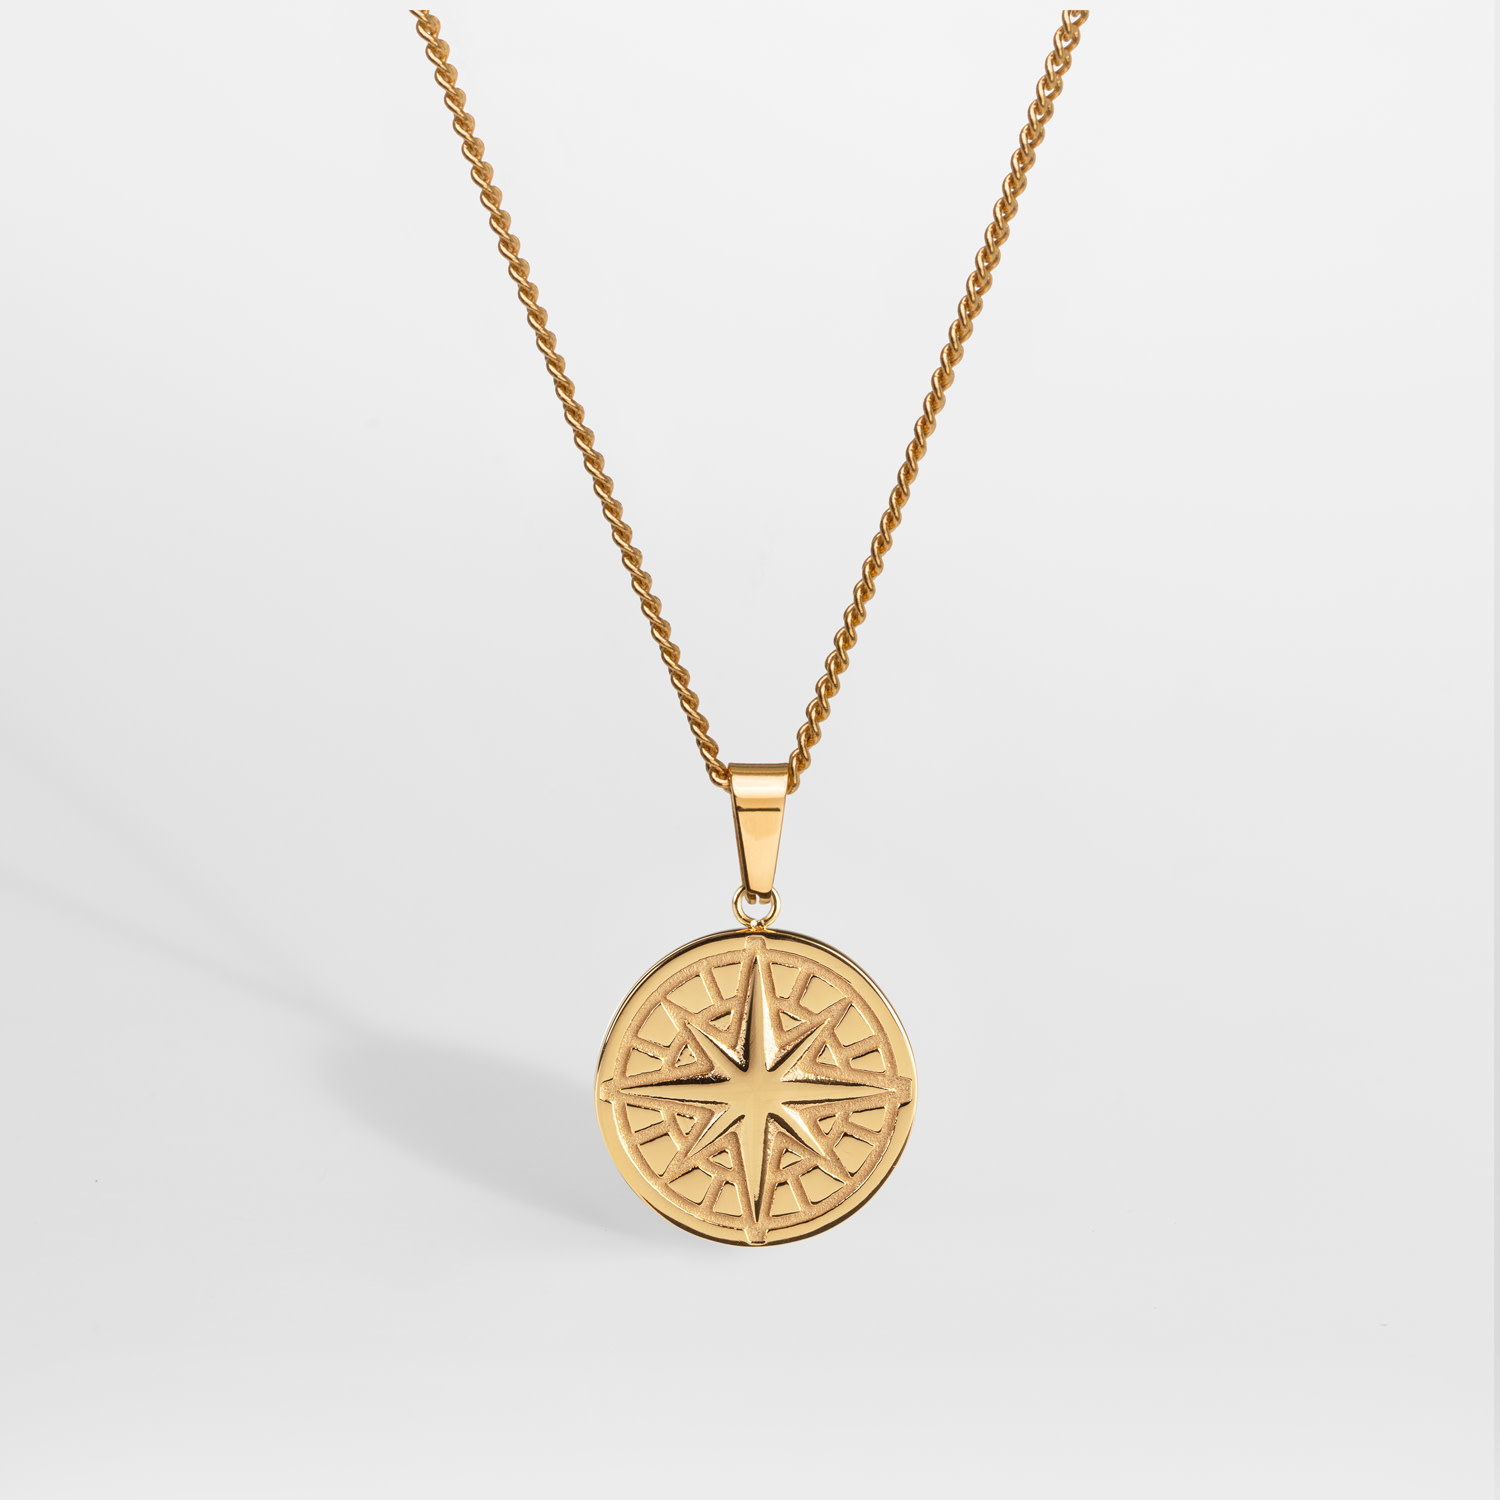 Northern Legacy Northern Legacy Compass Pendant 2.0 Necklace Gold Tone